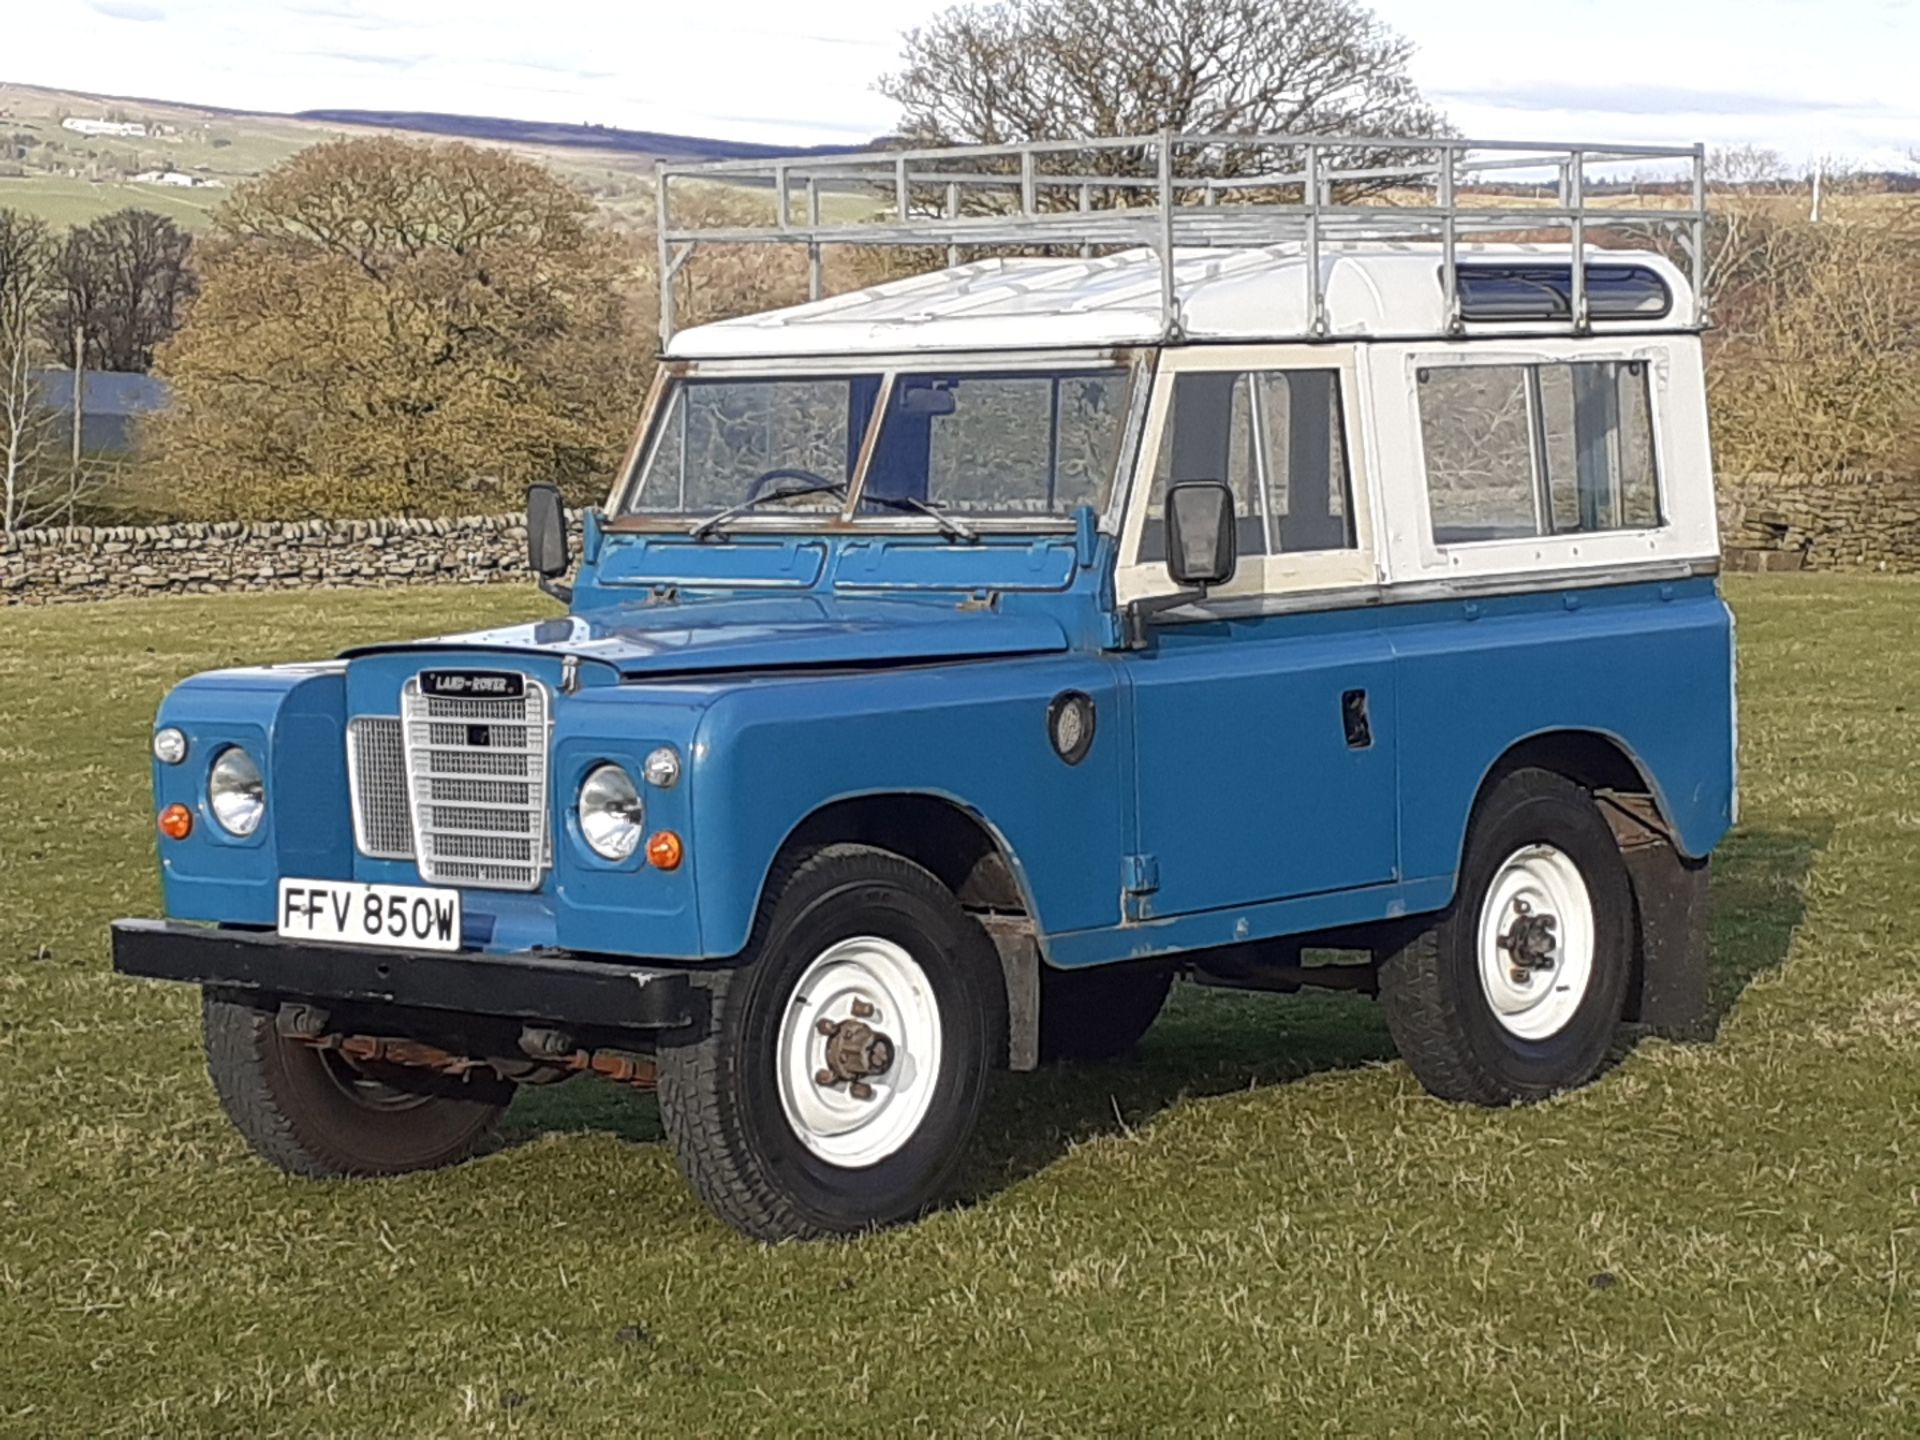 1980 LAND ROVER SERIES III CLASSIC STATION WAGON, TAX AND MOT EXEMPT *NO VAT* - Image 2 of 17